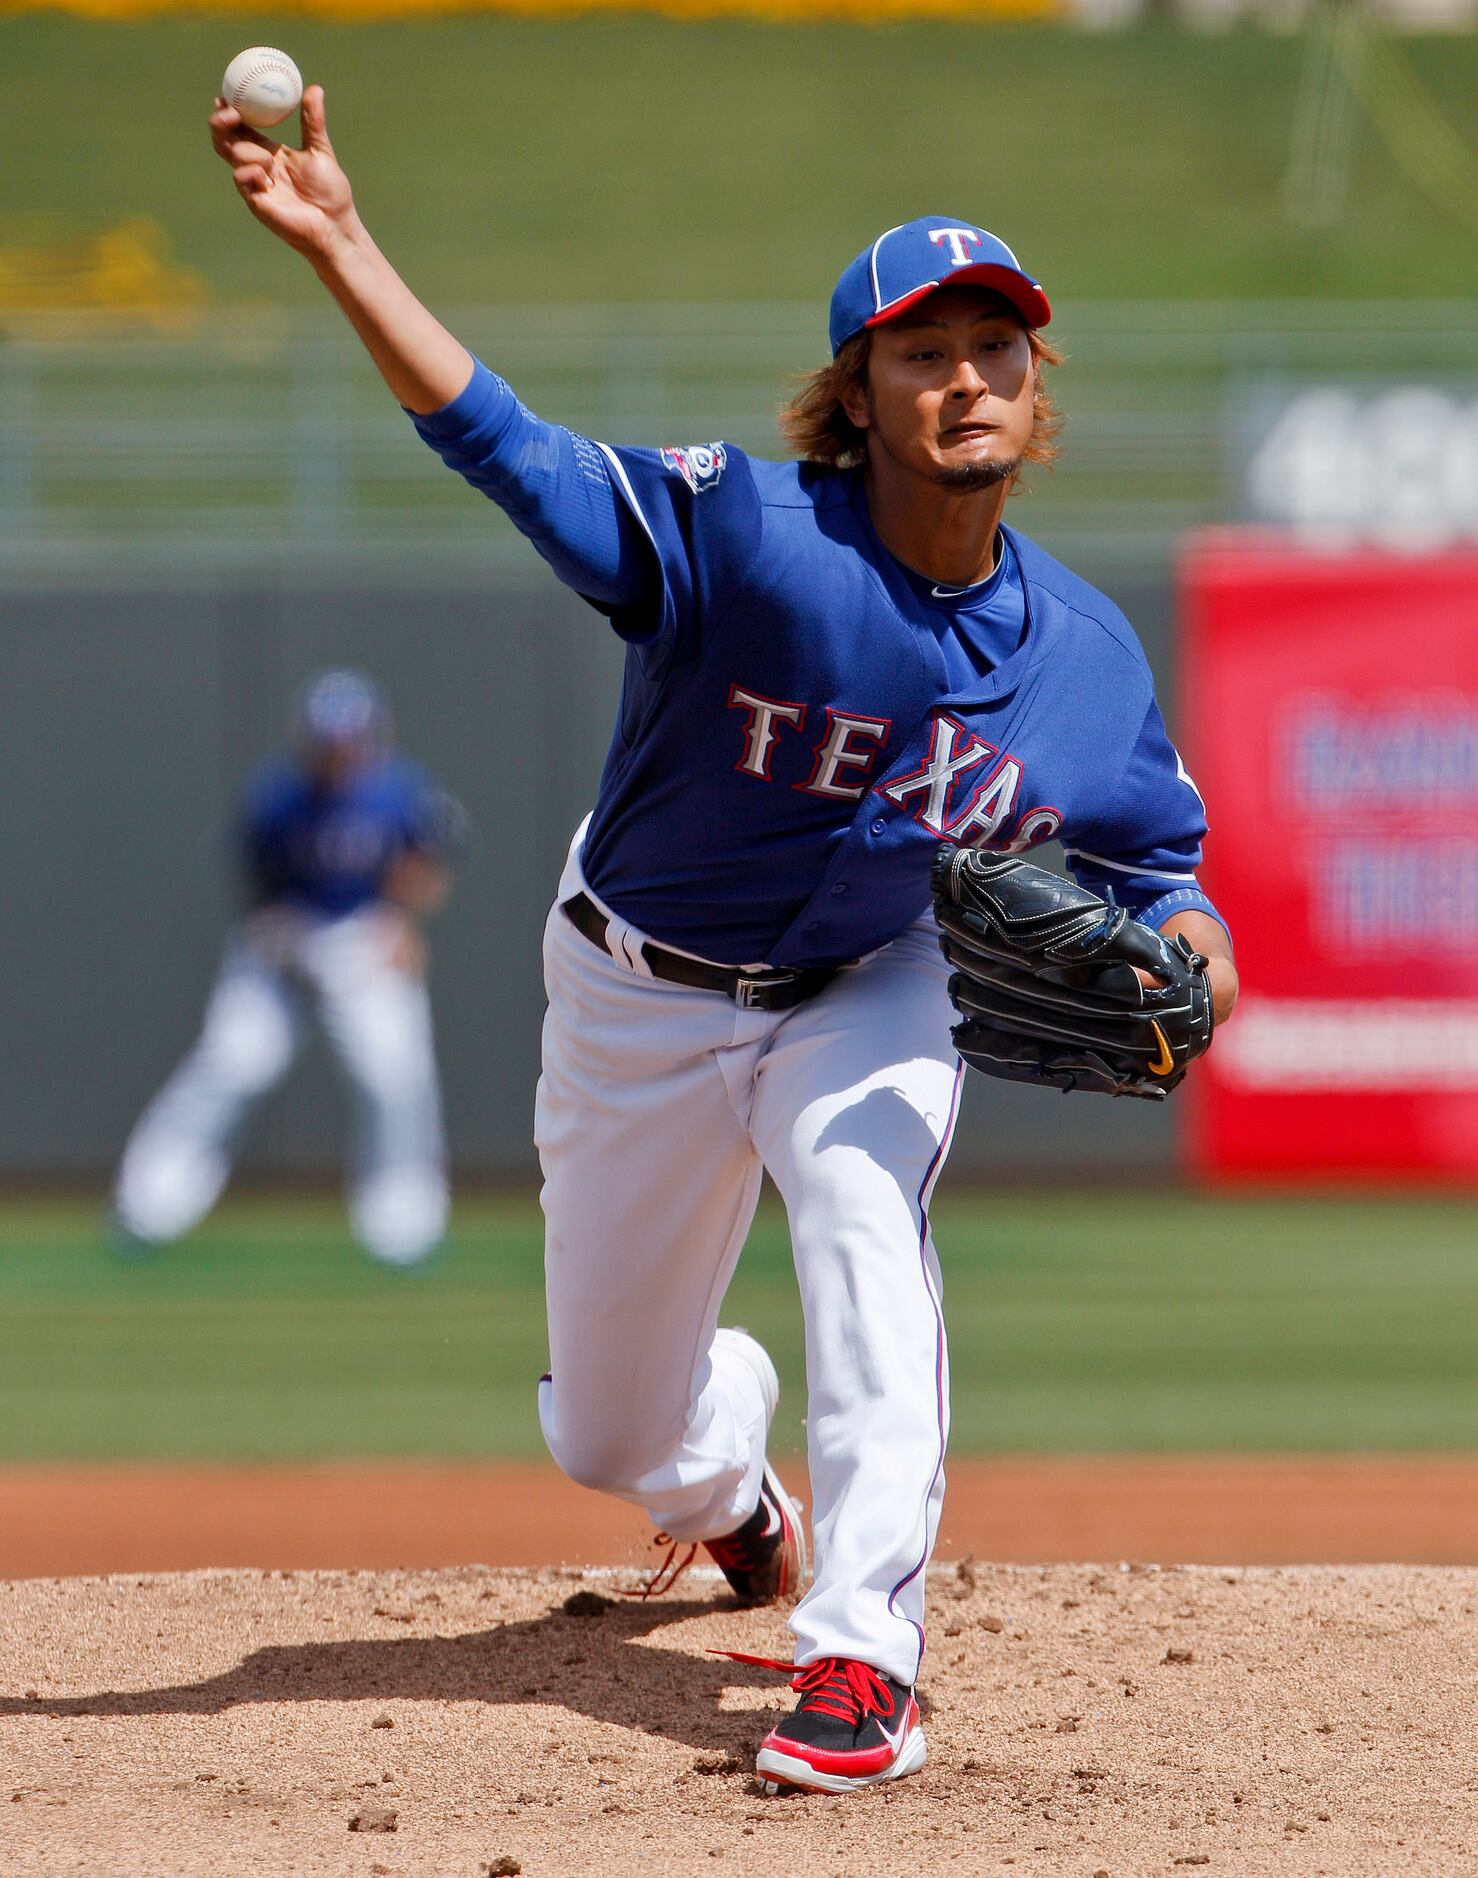 Why going slow has led to fast start for Yu Darvish